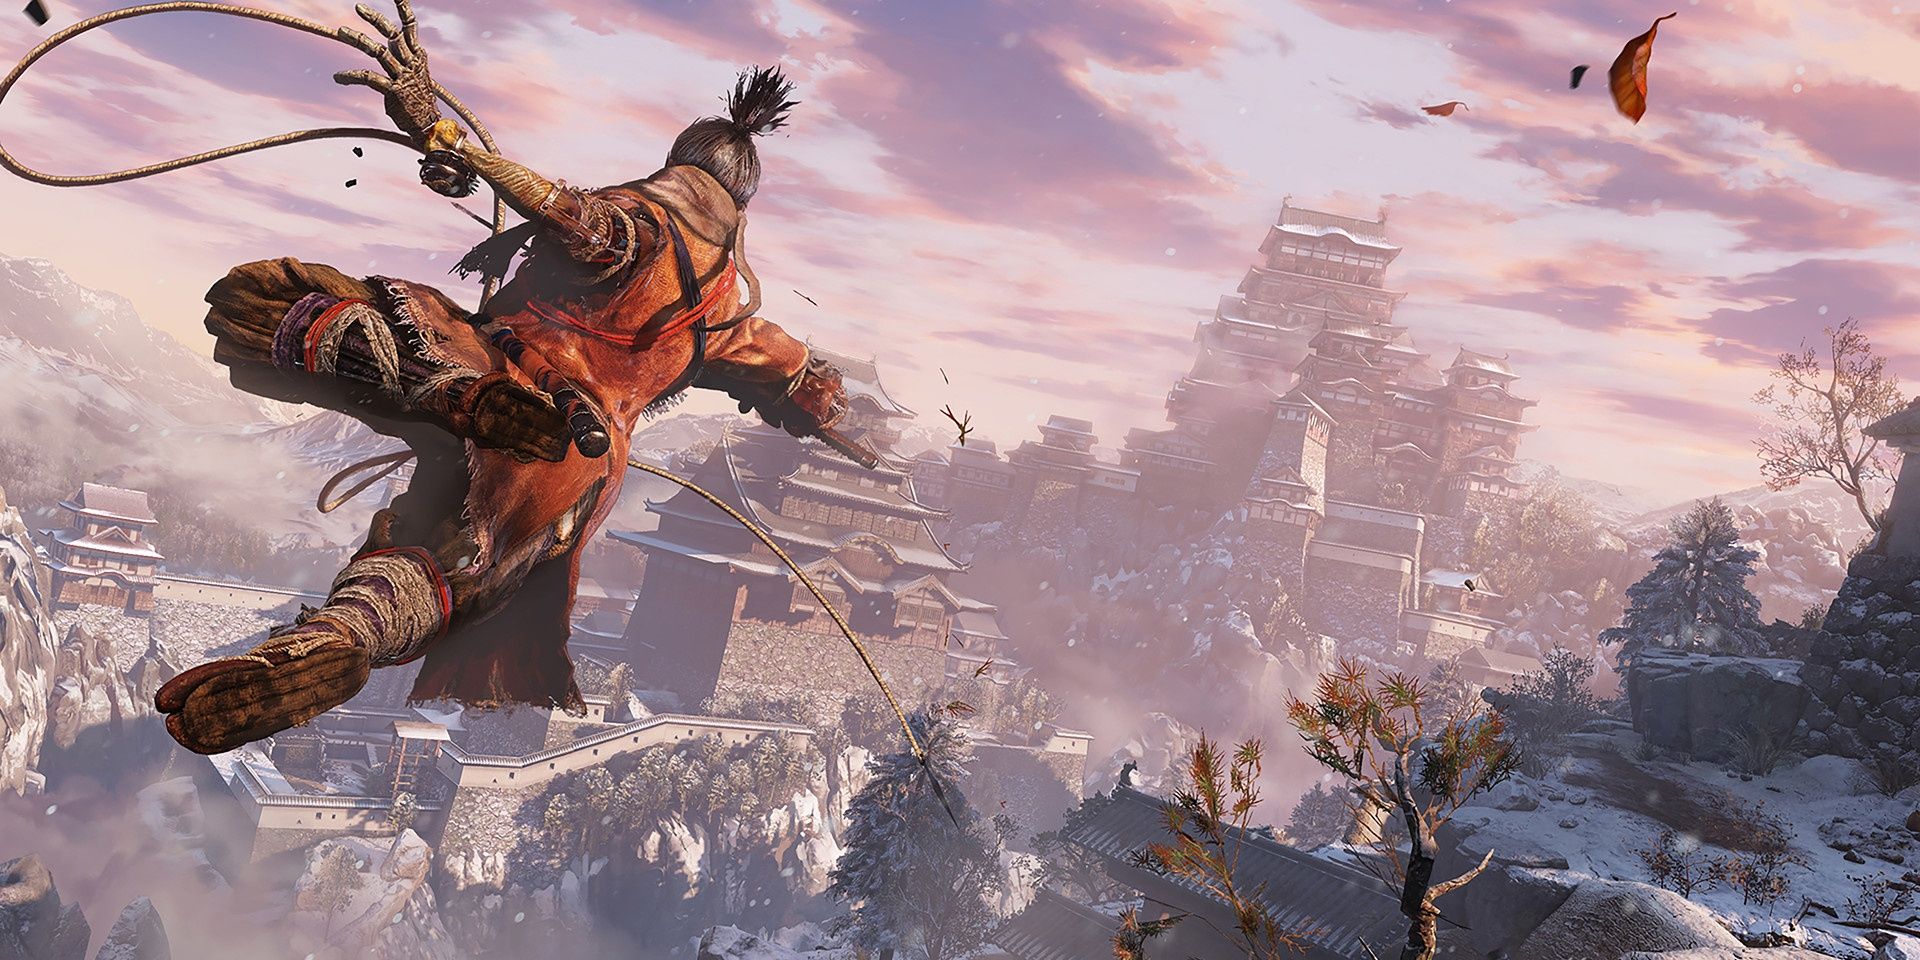 A screenshot showing the player using the grappling hook in Sekiro: Shadows Die Twice